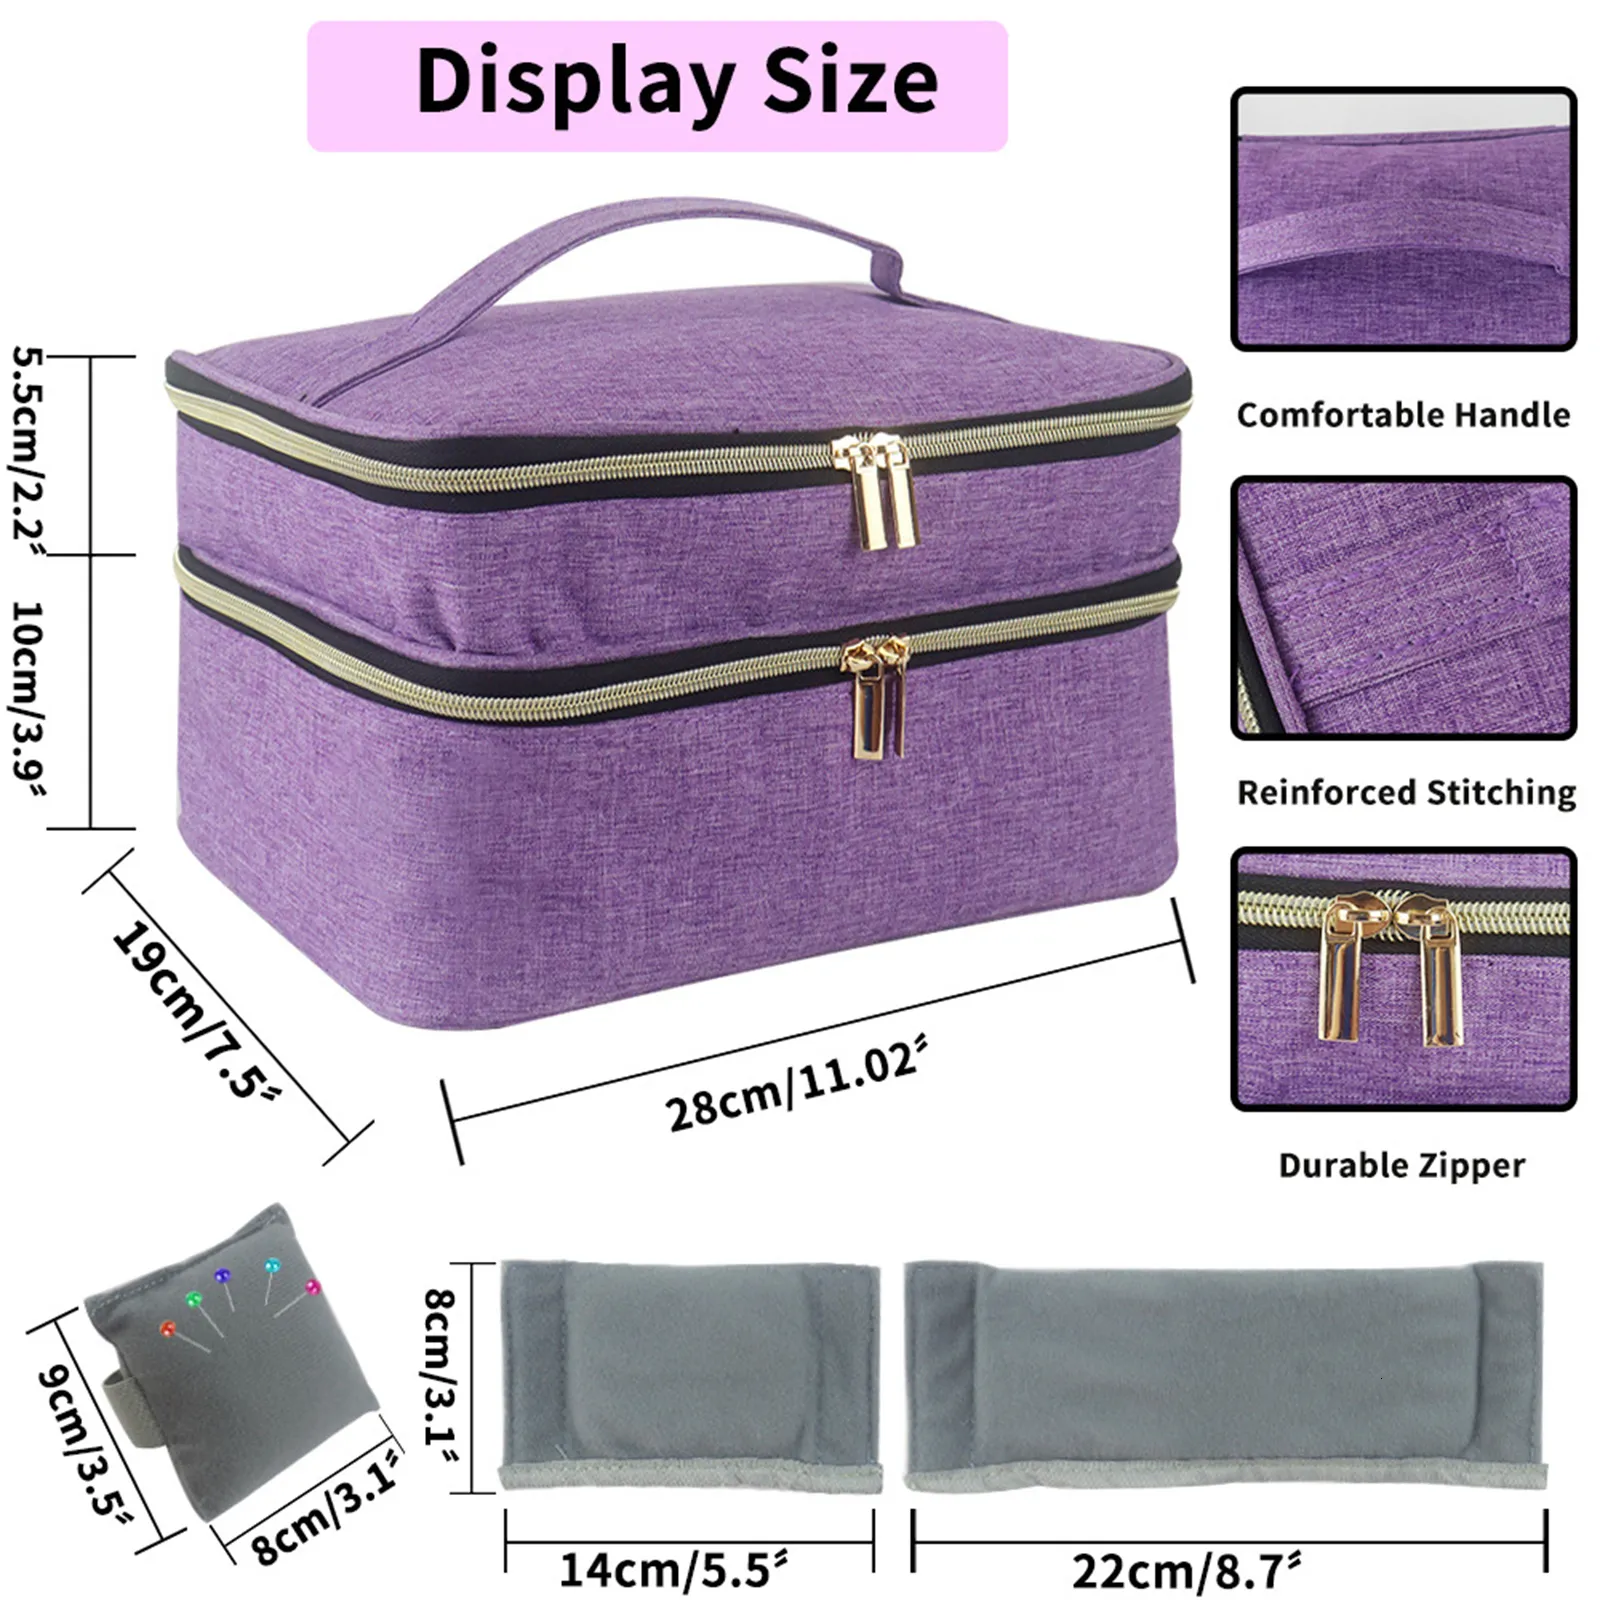 Portable Double Layer Sewing Travel Organizer Bag For Yarn, Embroidery, And  Floss Ideal For Home Organization And DIY Supplies From Kong09, $17.57